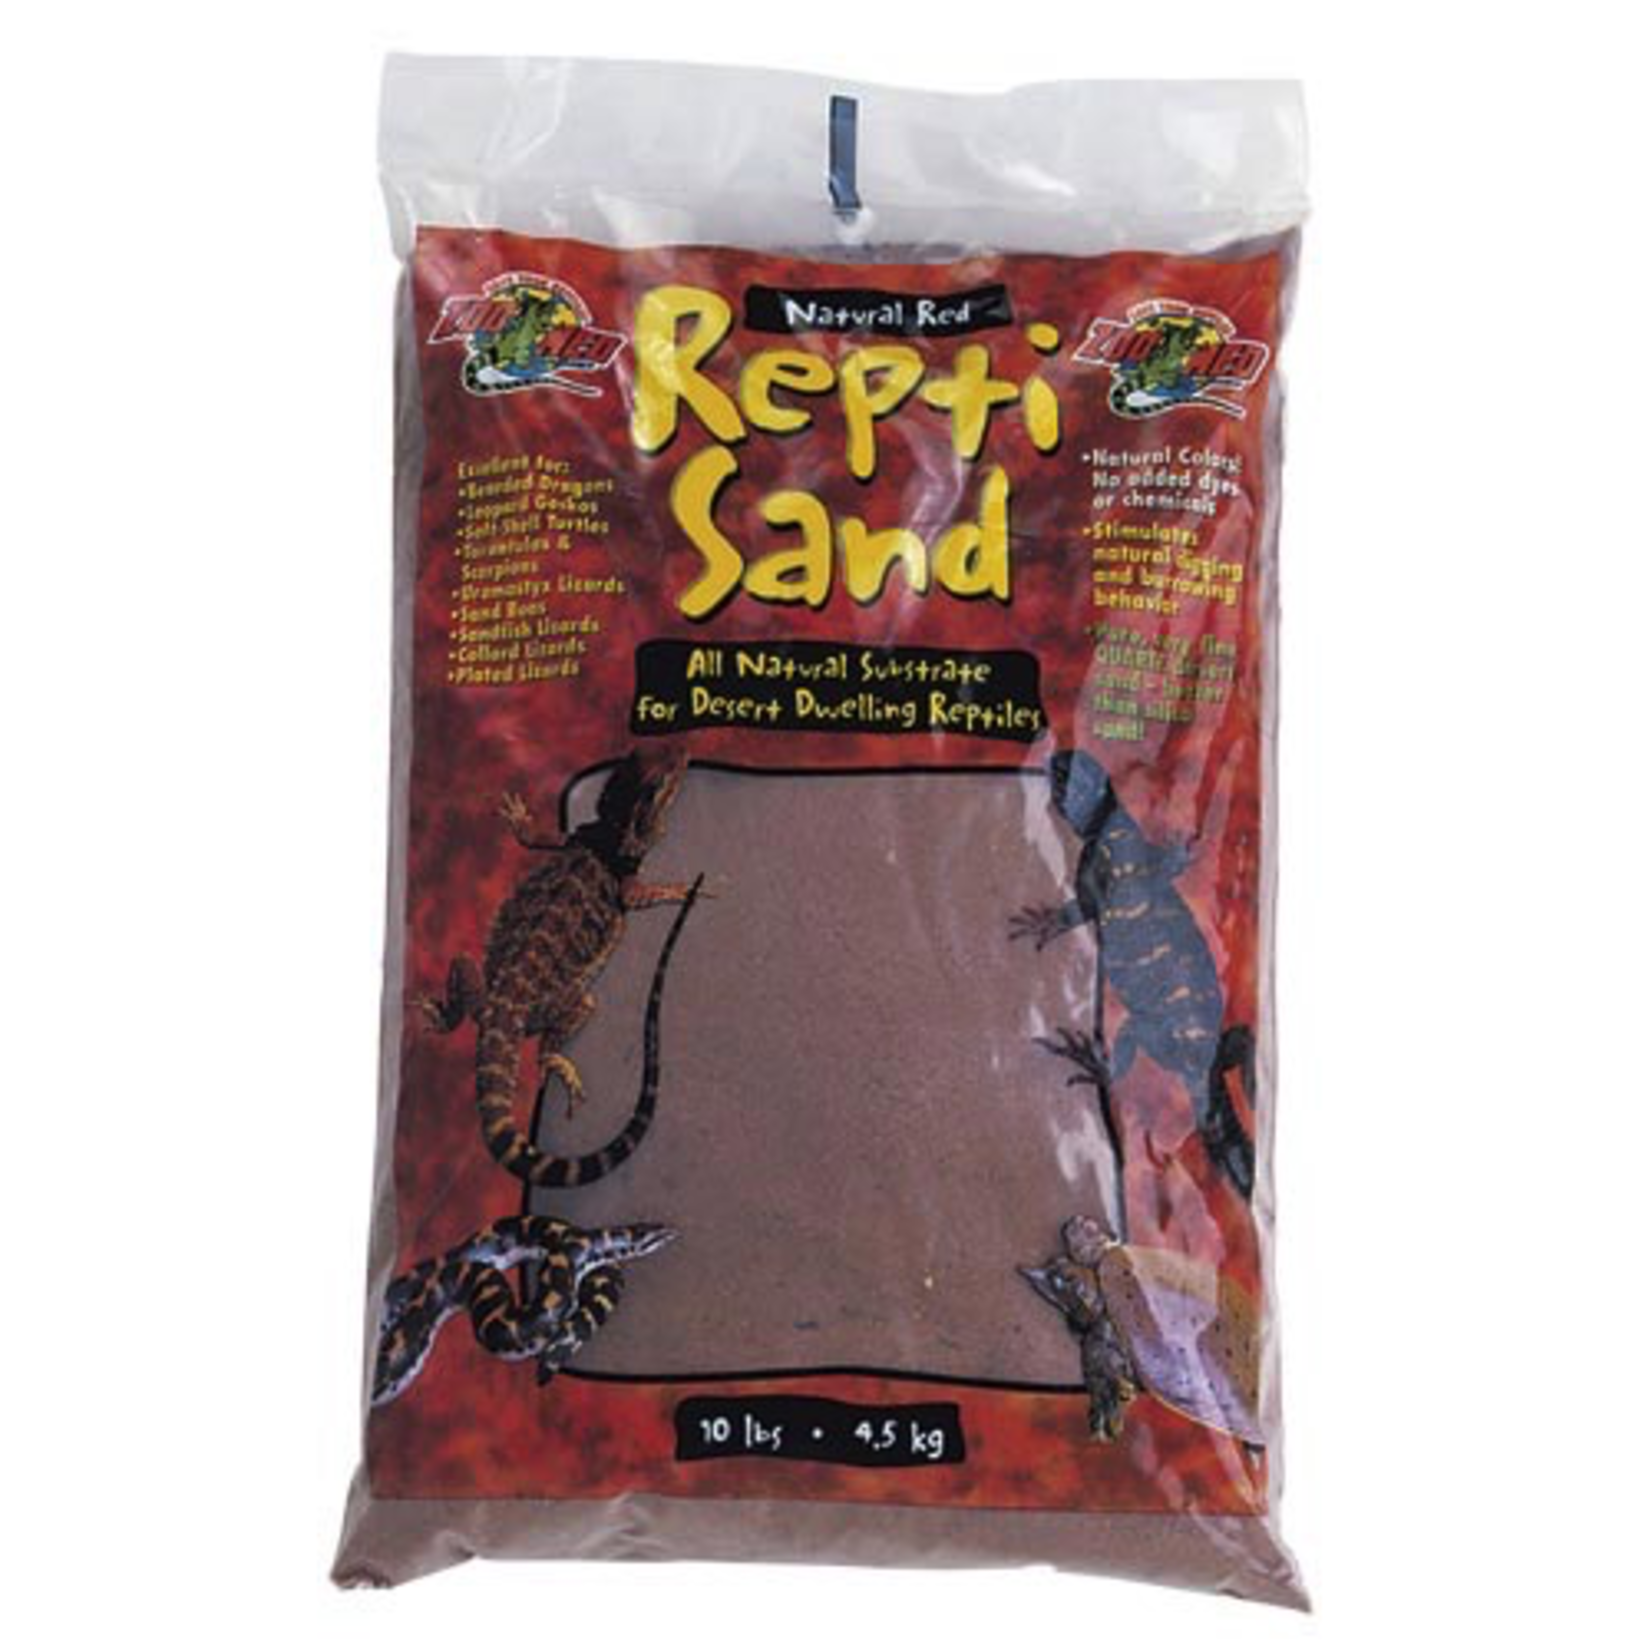 ReptiSand - Natural Red - 10 lb